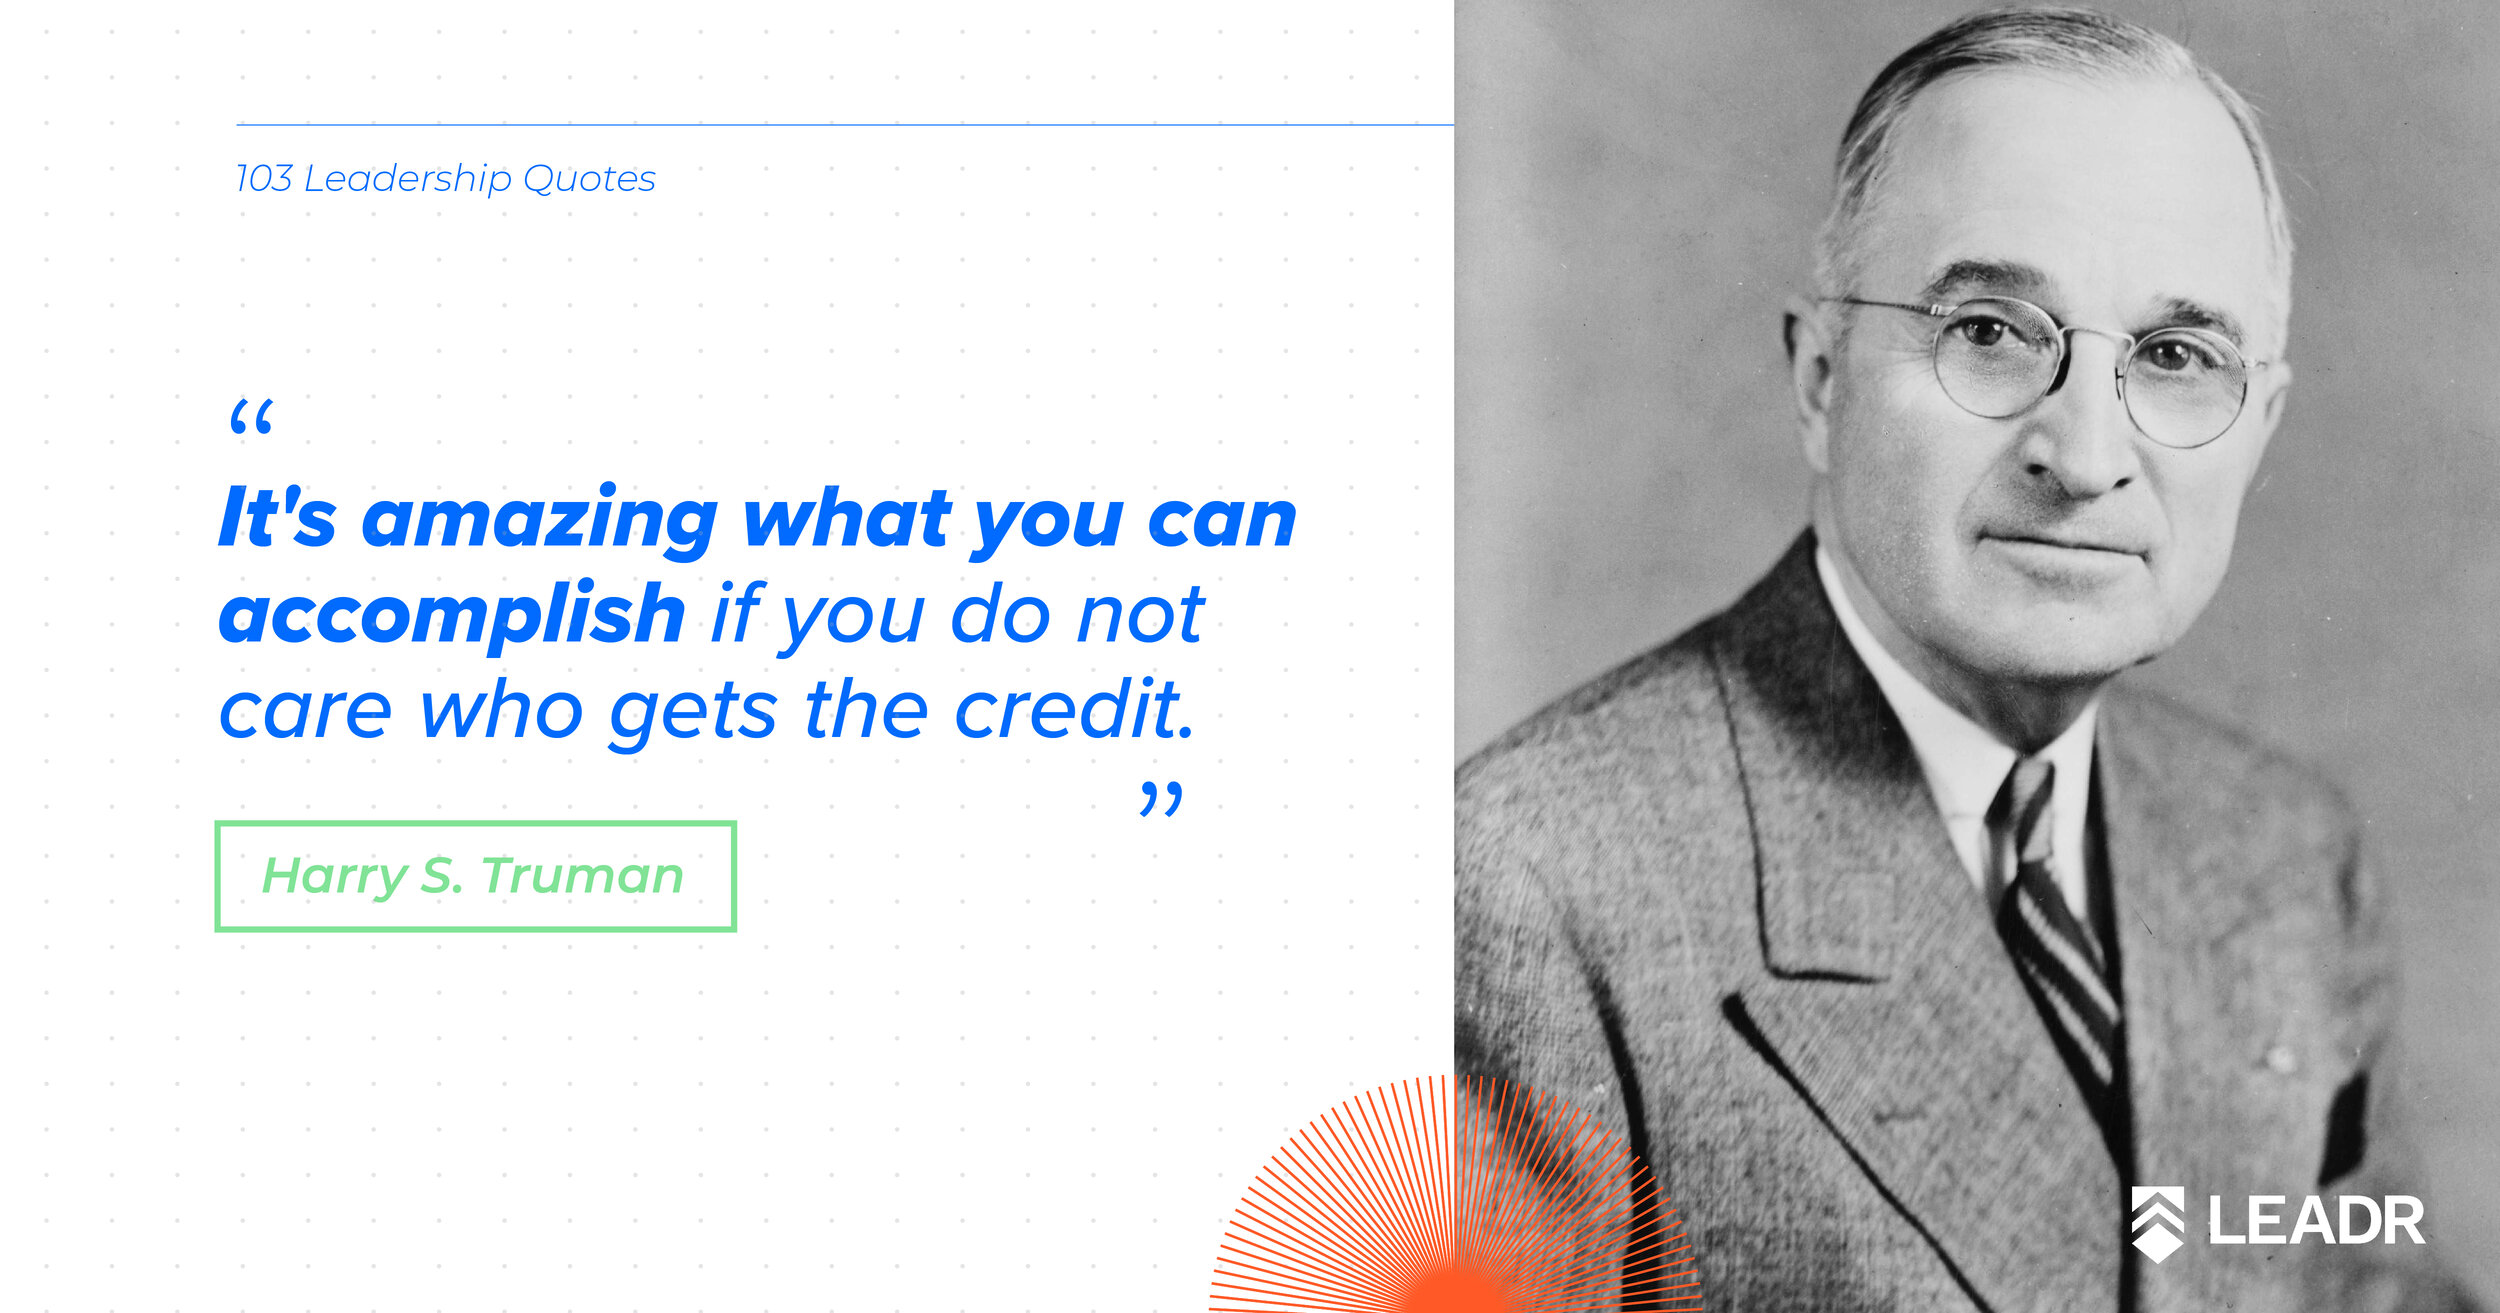 Royalty free downloadable leadership quotes - Harry S. Truman